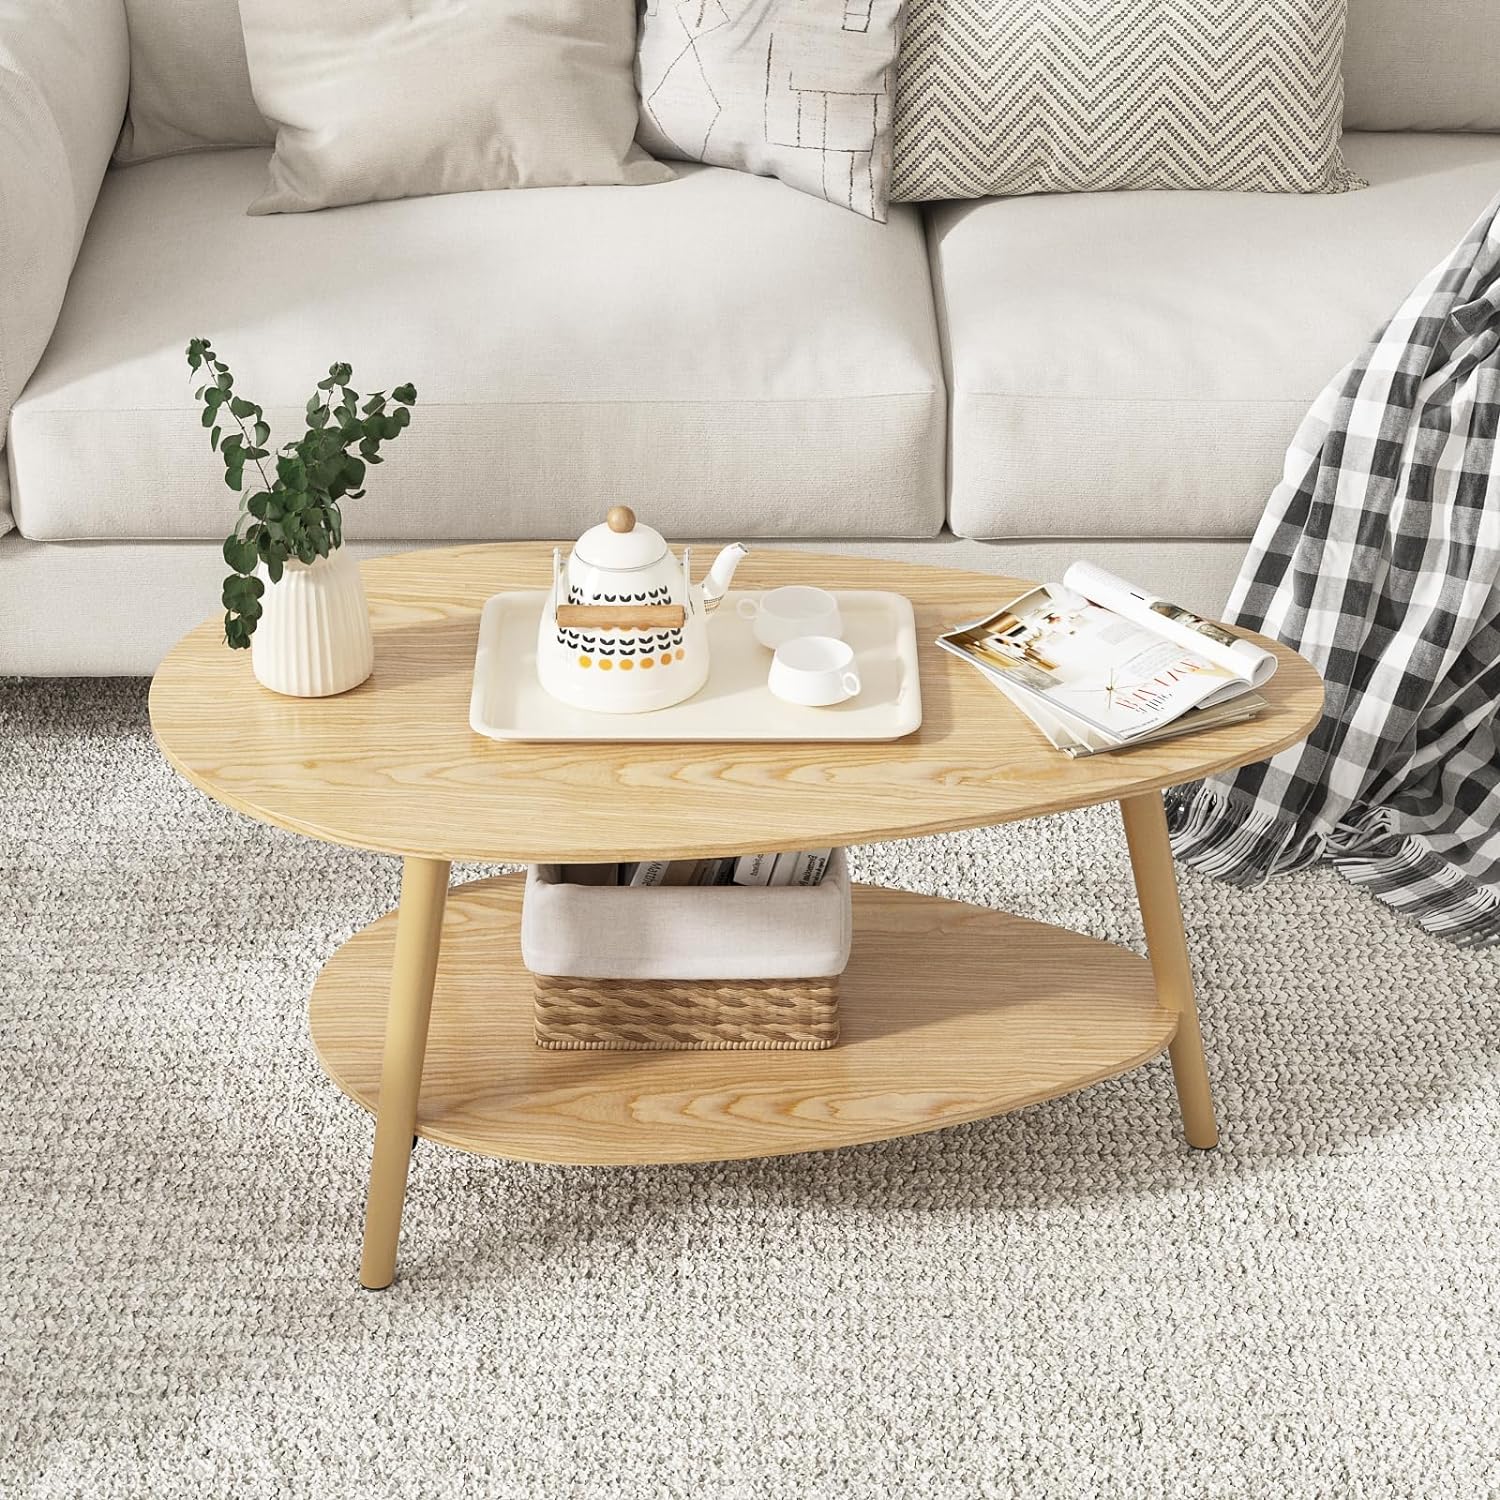 Maupvit Coffee Table Oval Wood Table